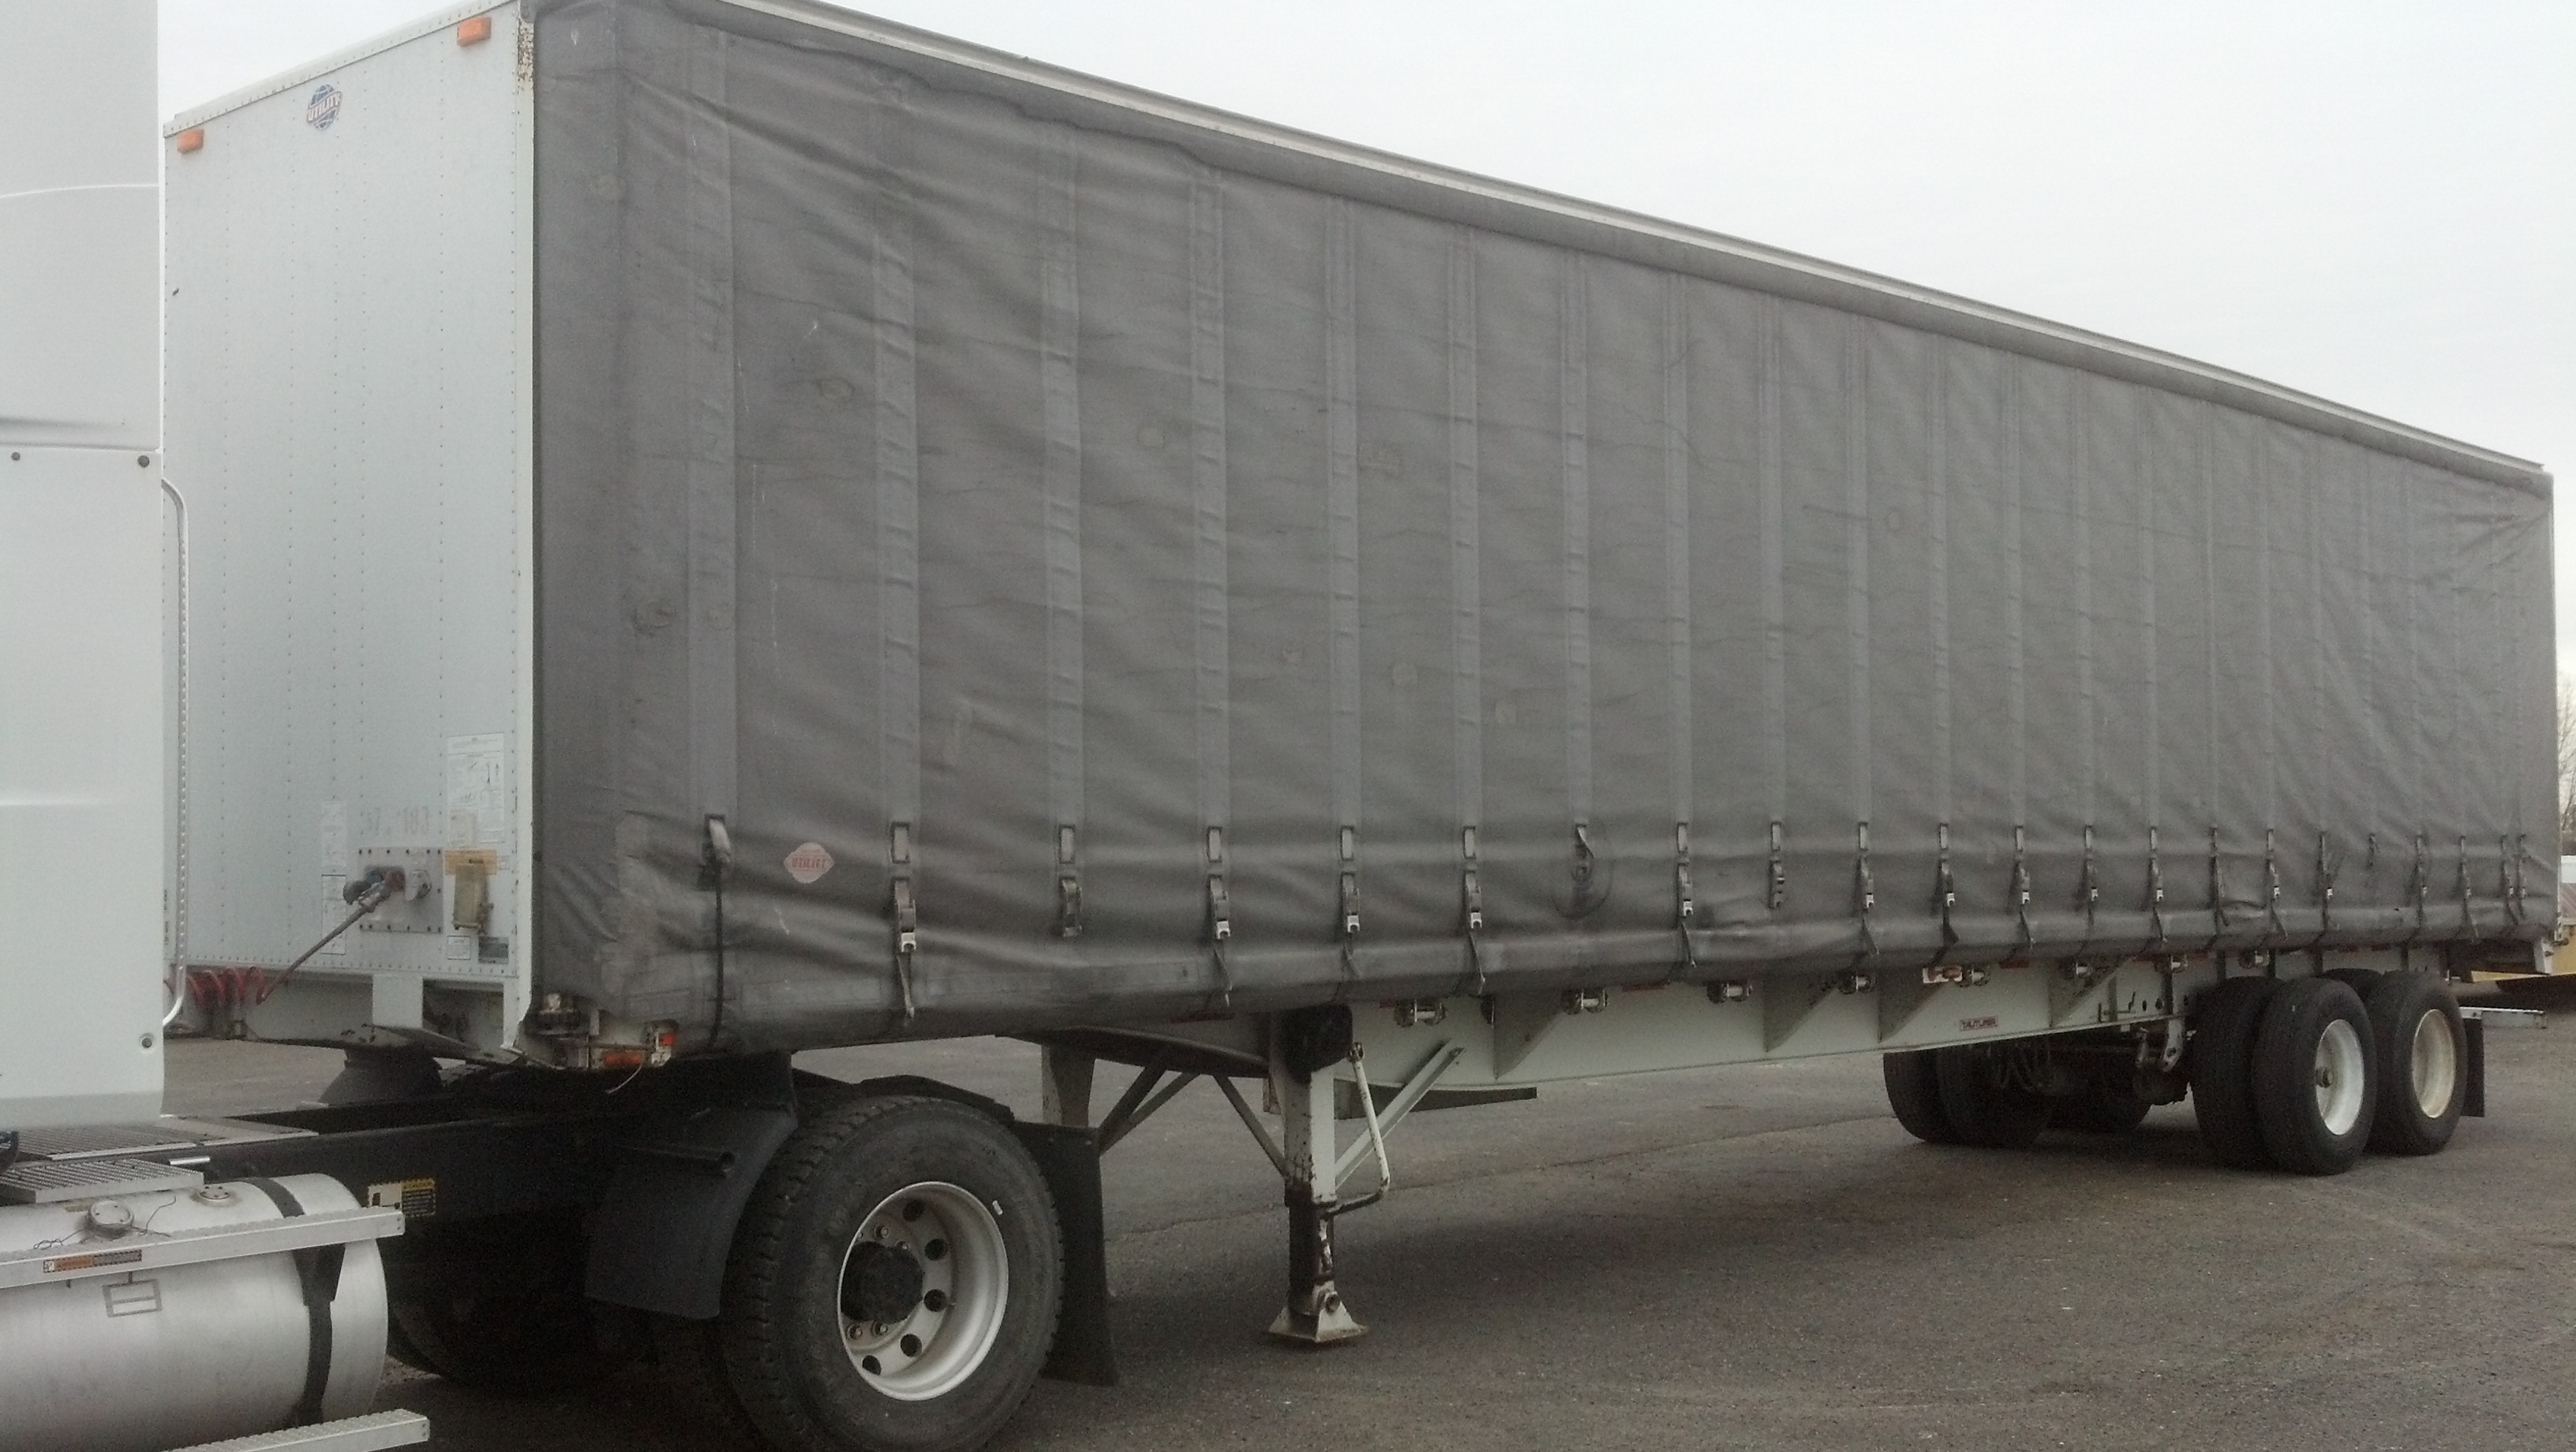 Clean Plastic Shower Curtain Reefer Flatbed Trailers